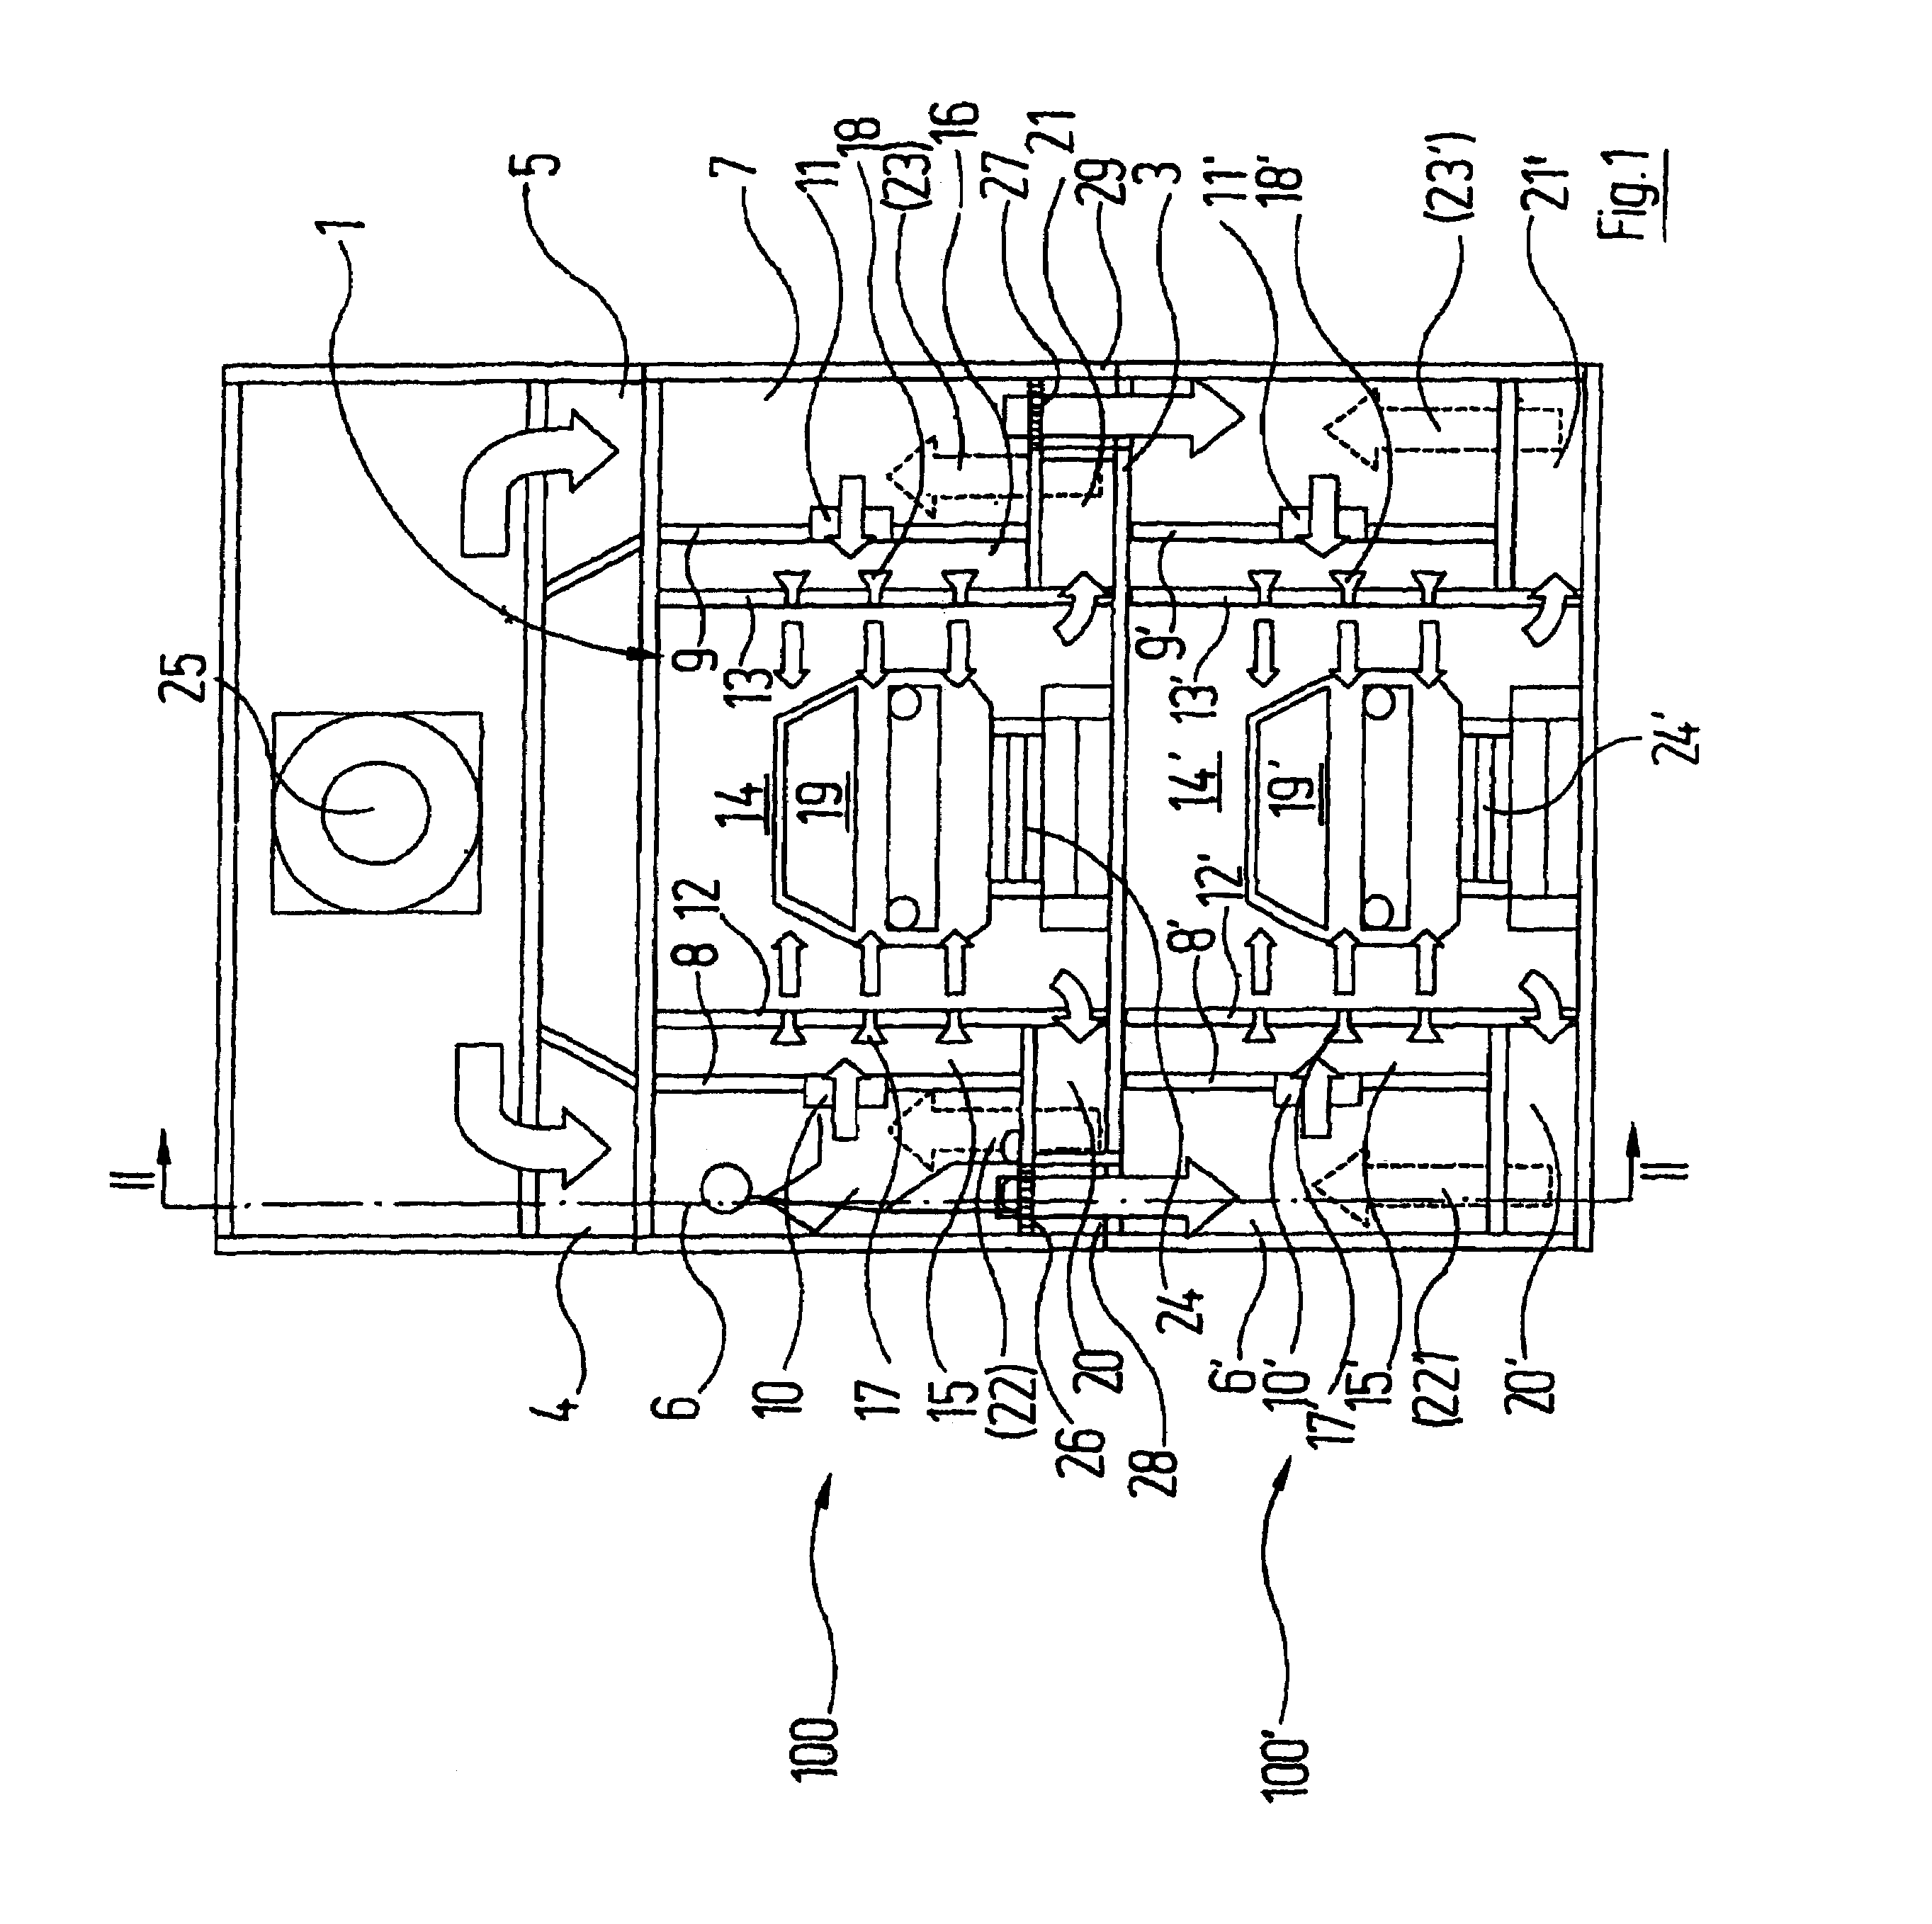 Device for controlling the temperature of objects